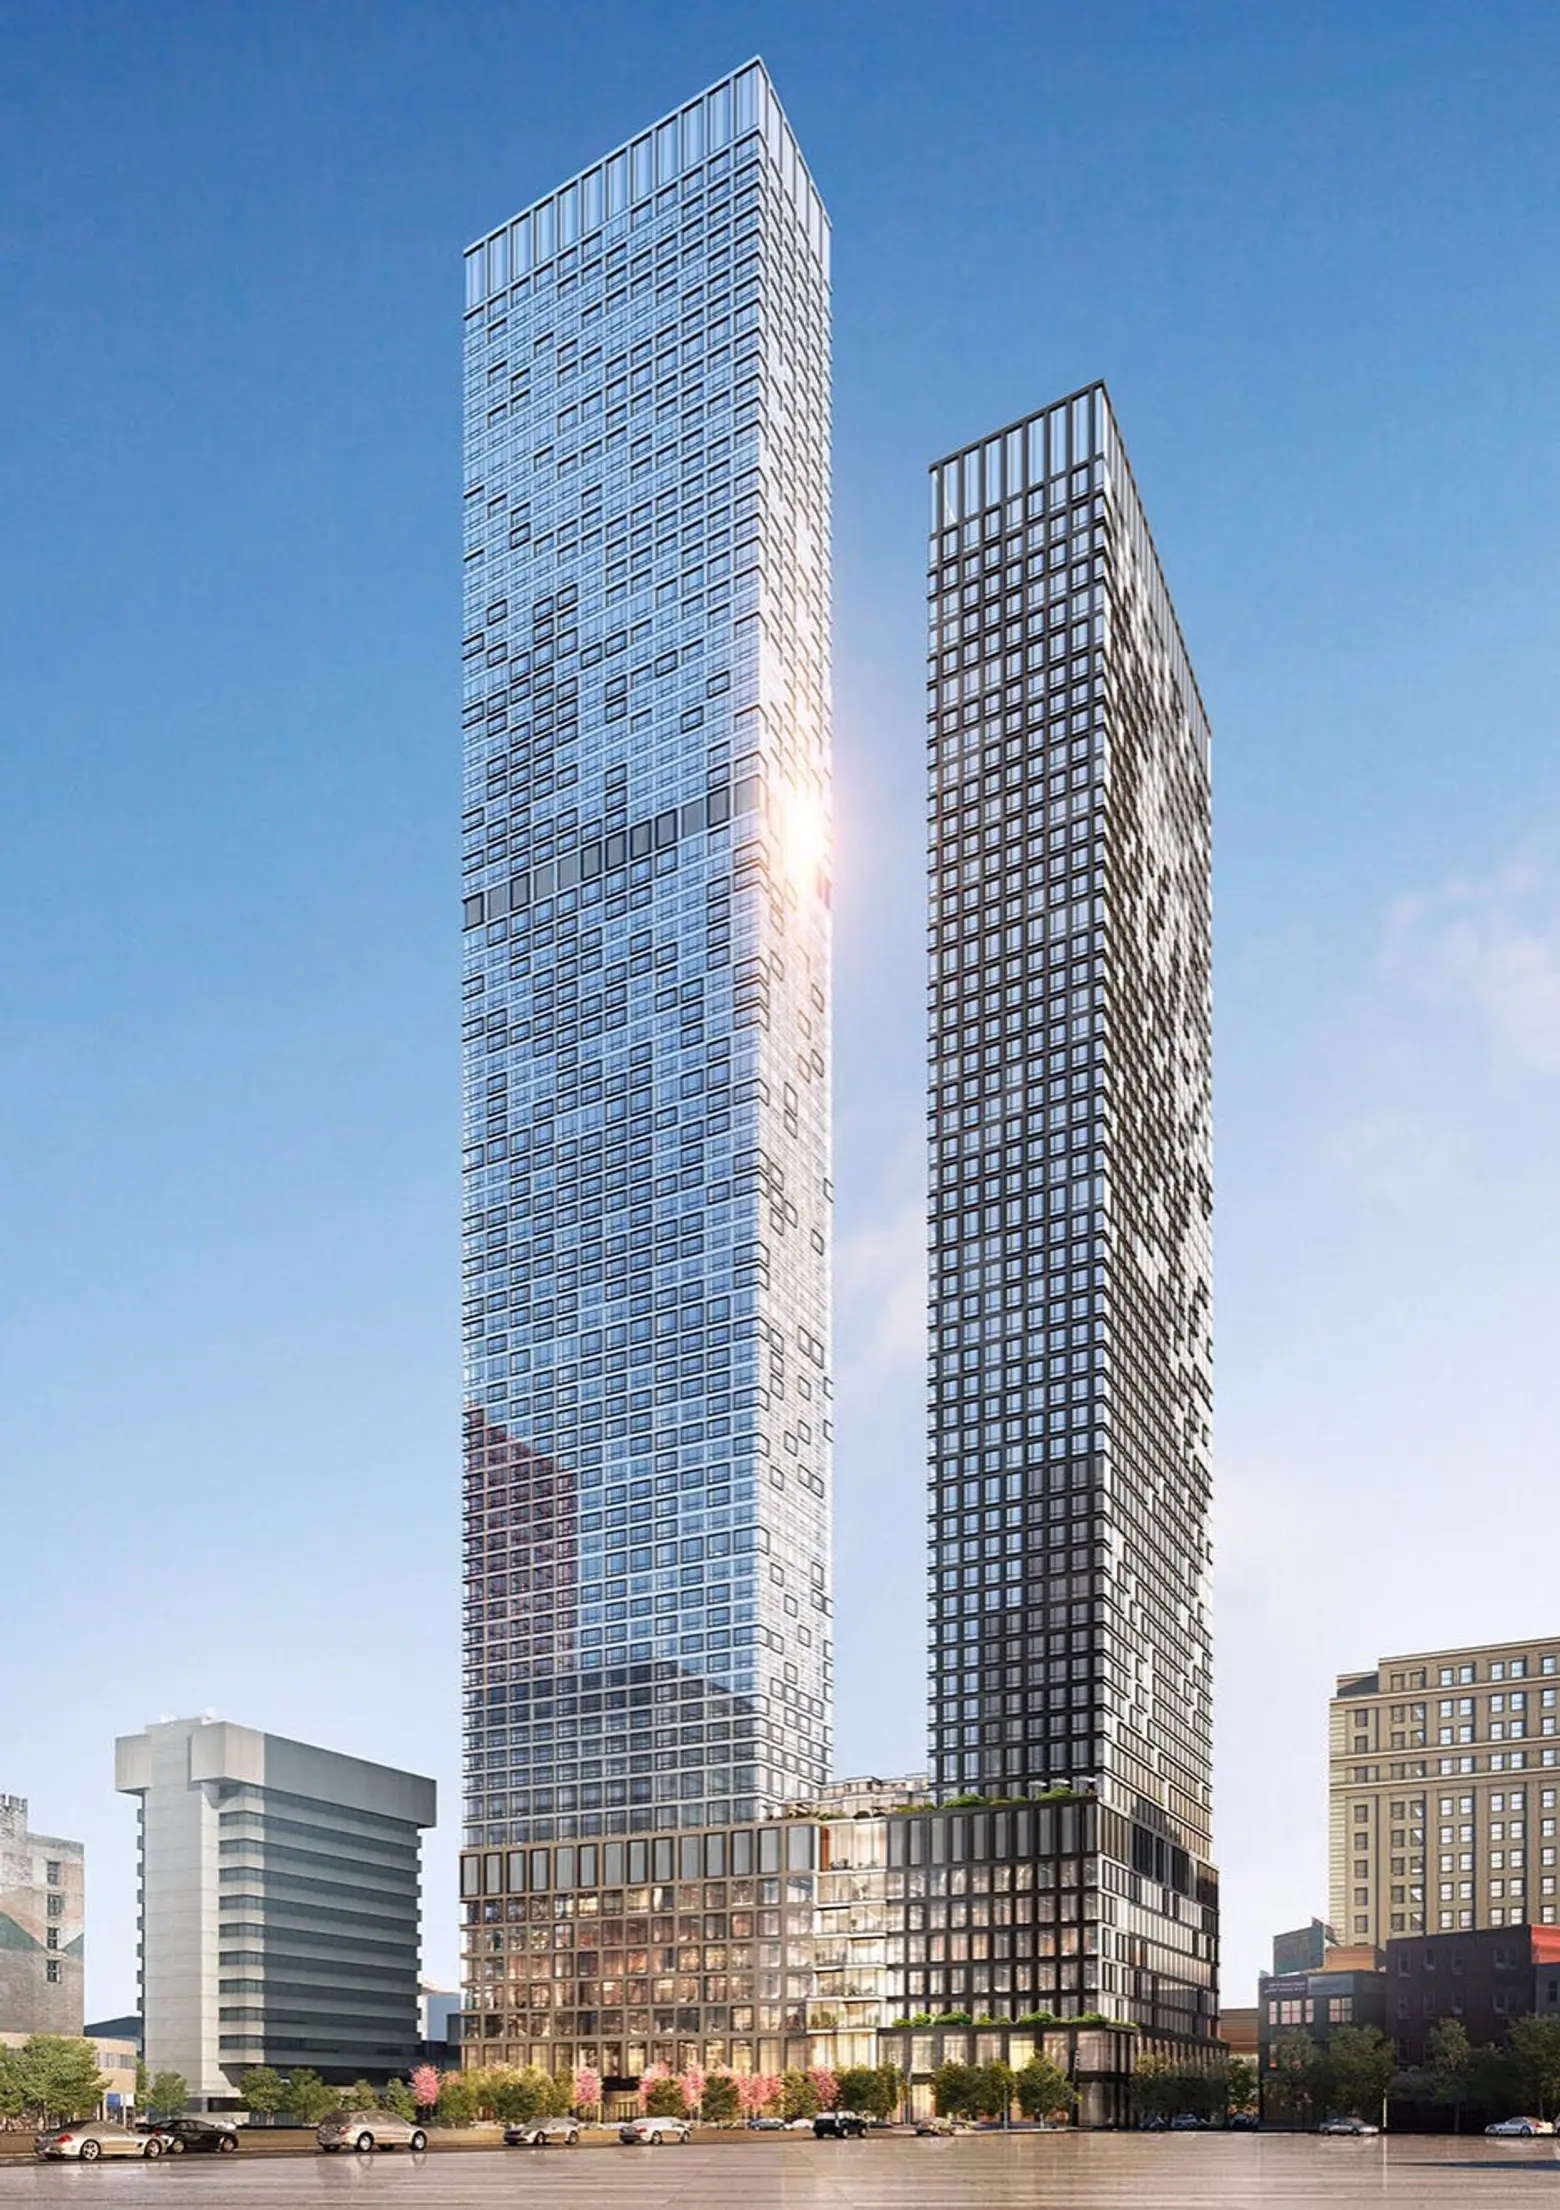 2 Million SQFT Tower Project Rises in Journal Square